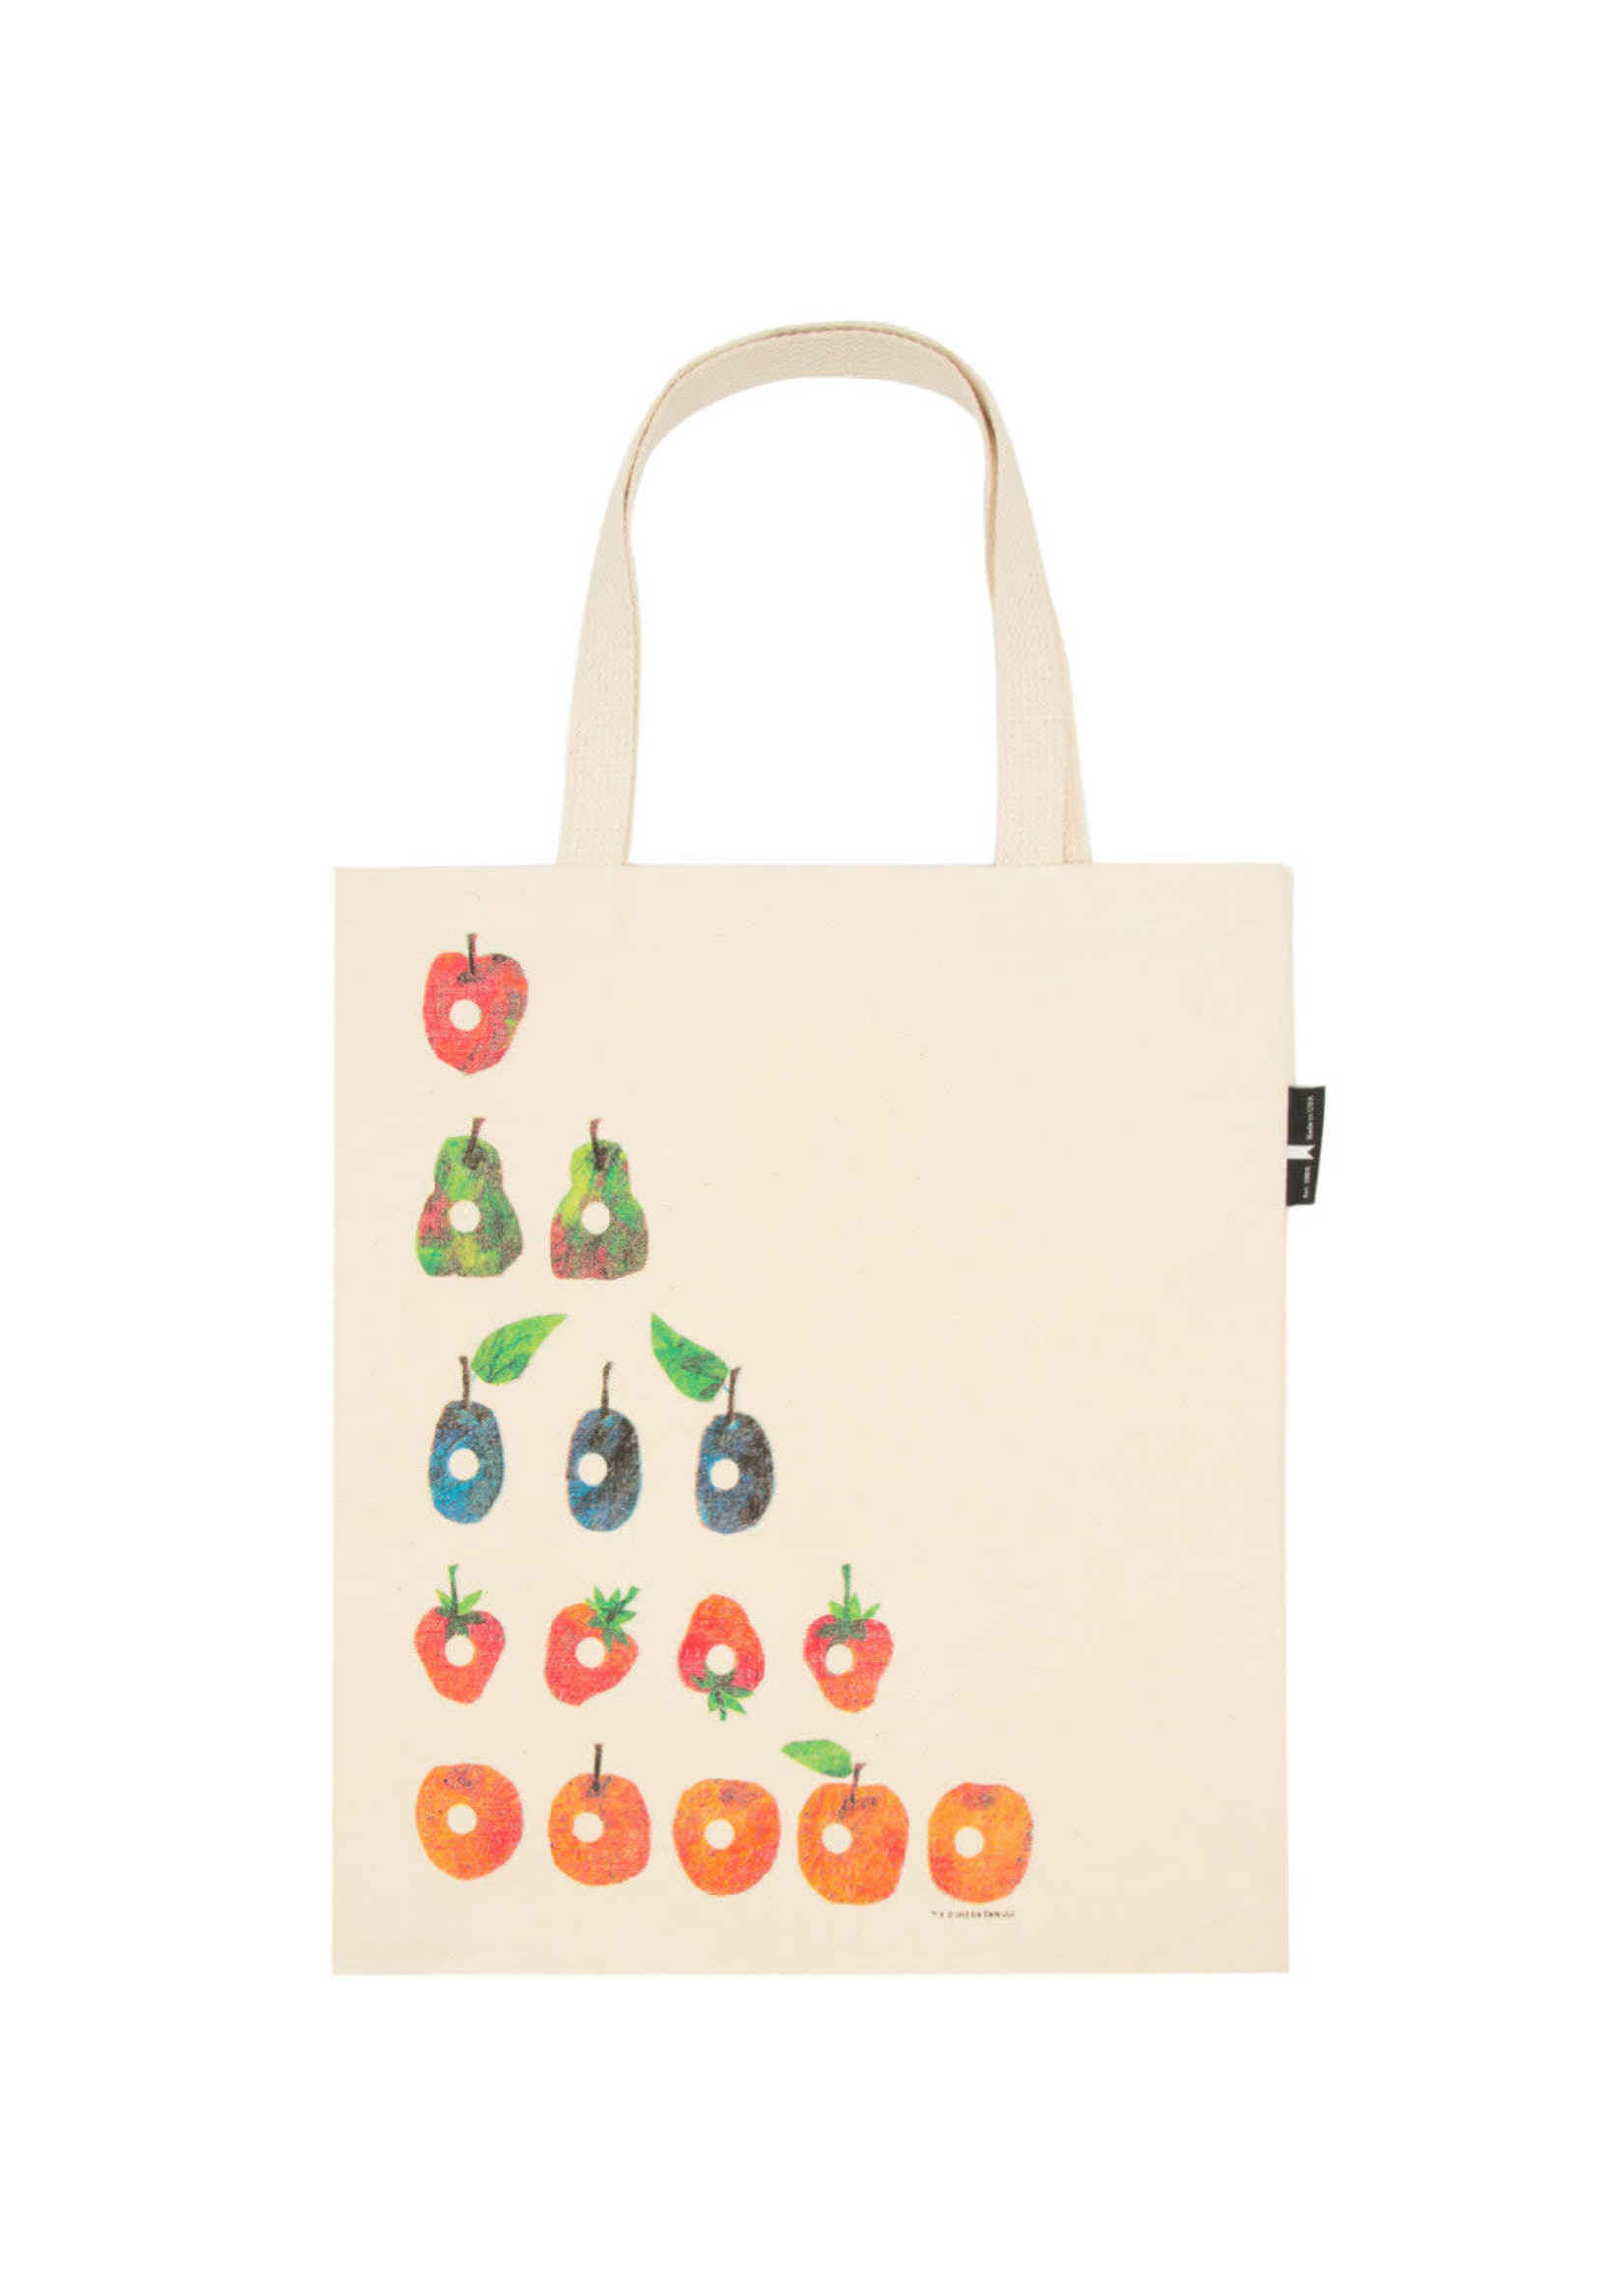 Out of Print The Very Hungry Caterpillar Tote